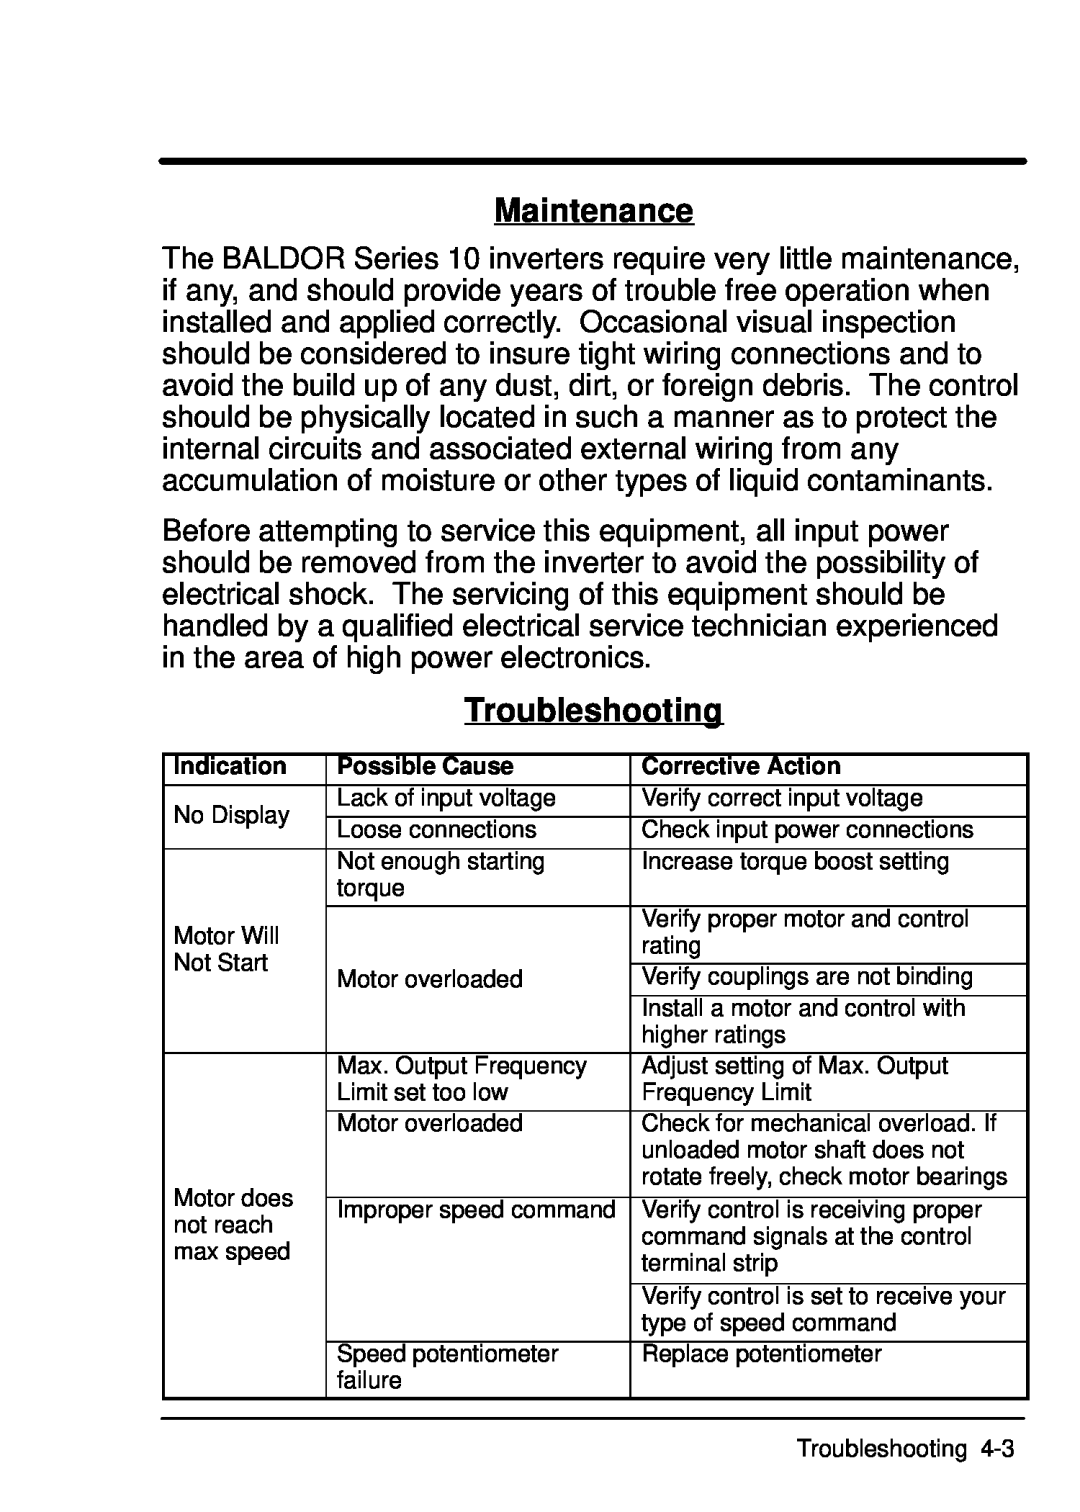 Baldor ID101F50-E manual Maintenance, Troubleshooting, Indication, Possible Cause, Corrective Action, Motor overloaded 